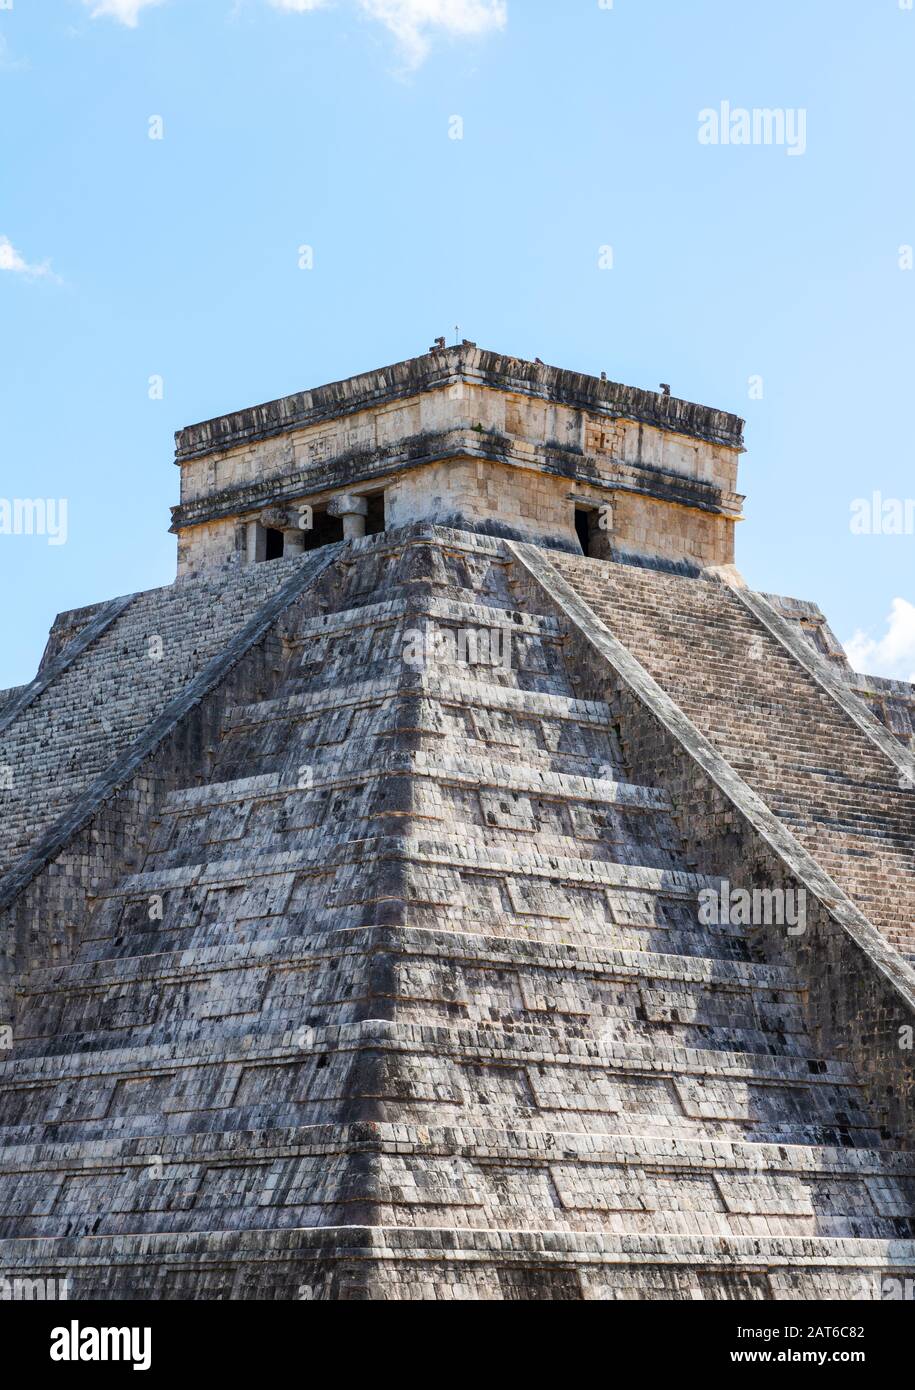 Famous Pyramid of Kukulcan at Chichen Itza, the largest archaeological cities of the pre-Columbian Maya civilization in the Yucatan Peninsula of Mexic Stock Photo